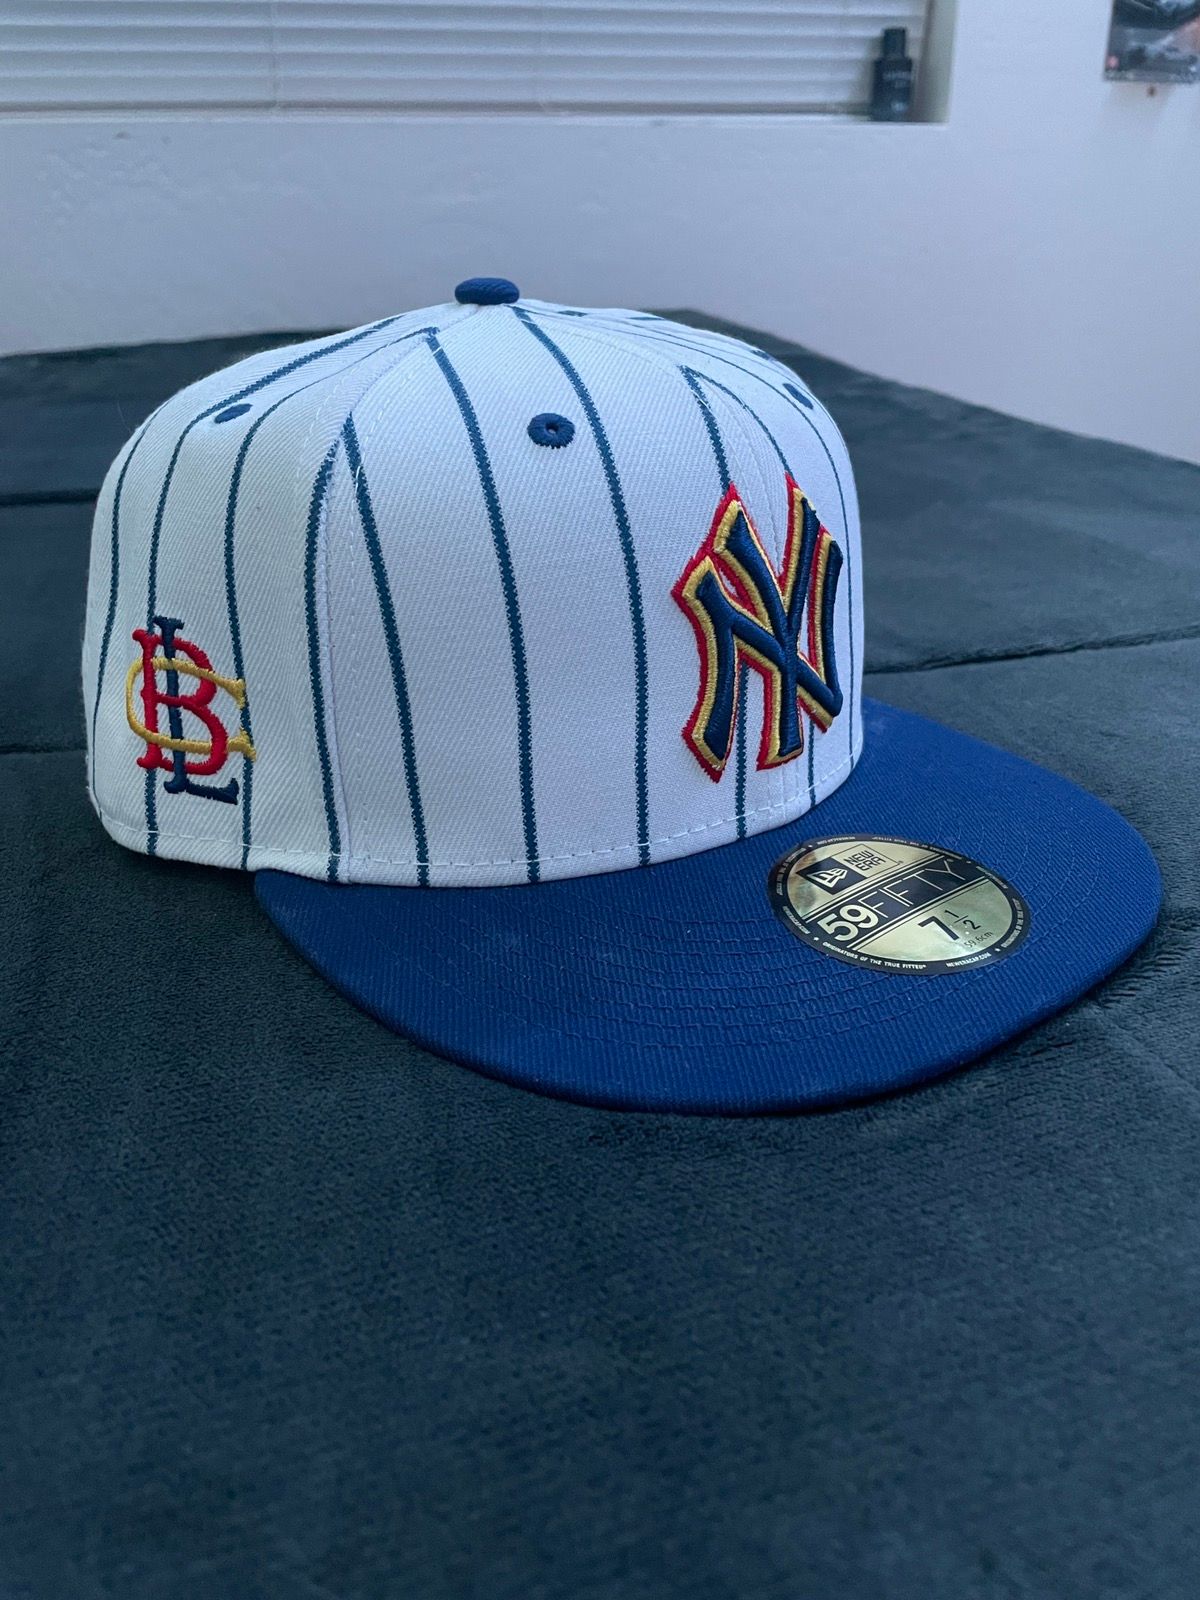 MLB 7 1/2 New Era NY Yankees “Big League Chew” Fitted | Grailed